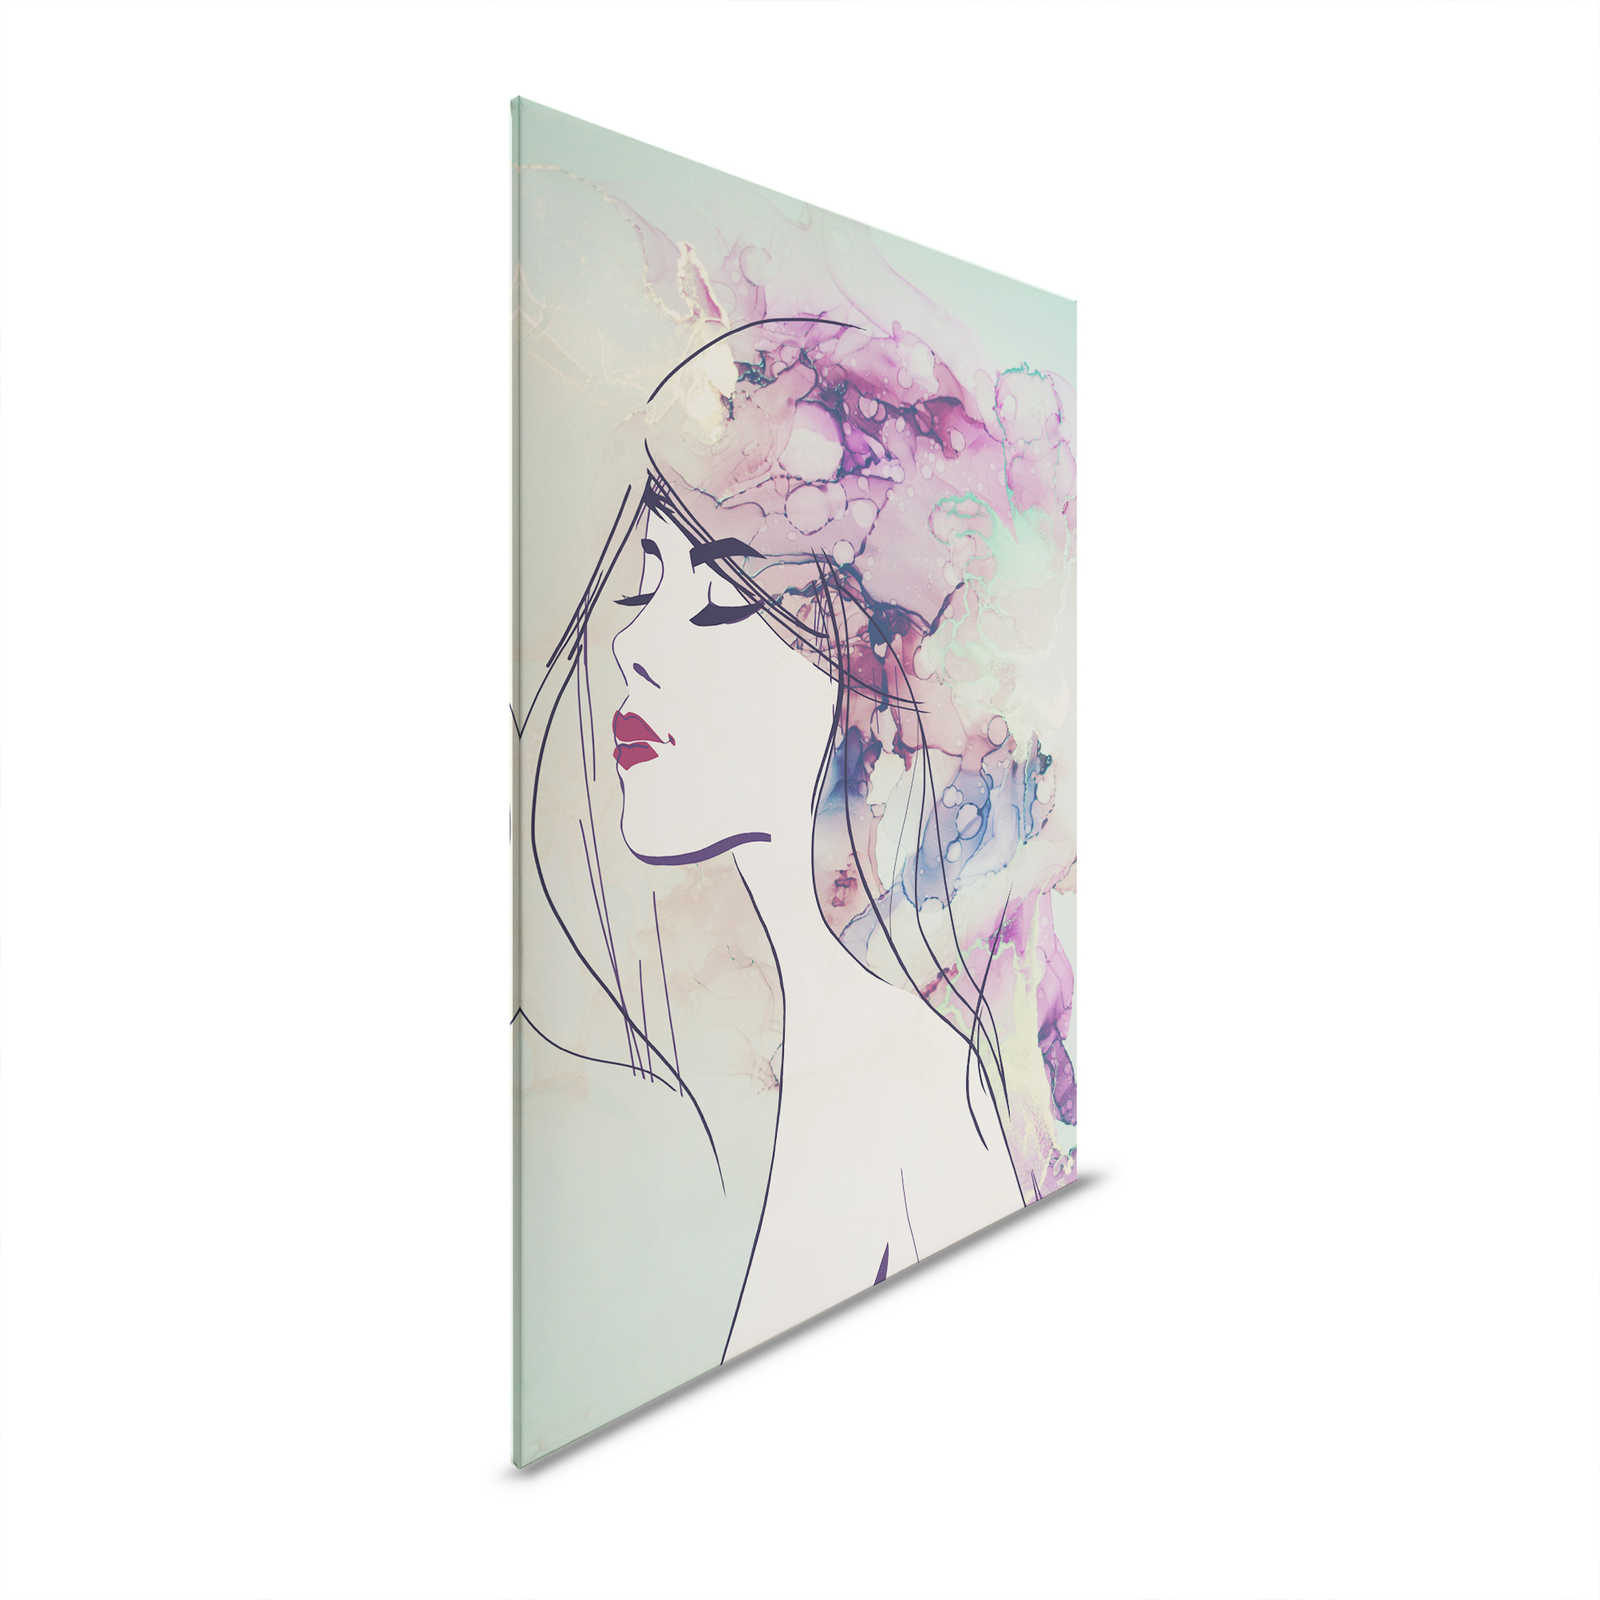 Acrylic Design Canvas Painting Woman Face in Turquoise & Purple - 1.20 m x 0.80 m
